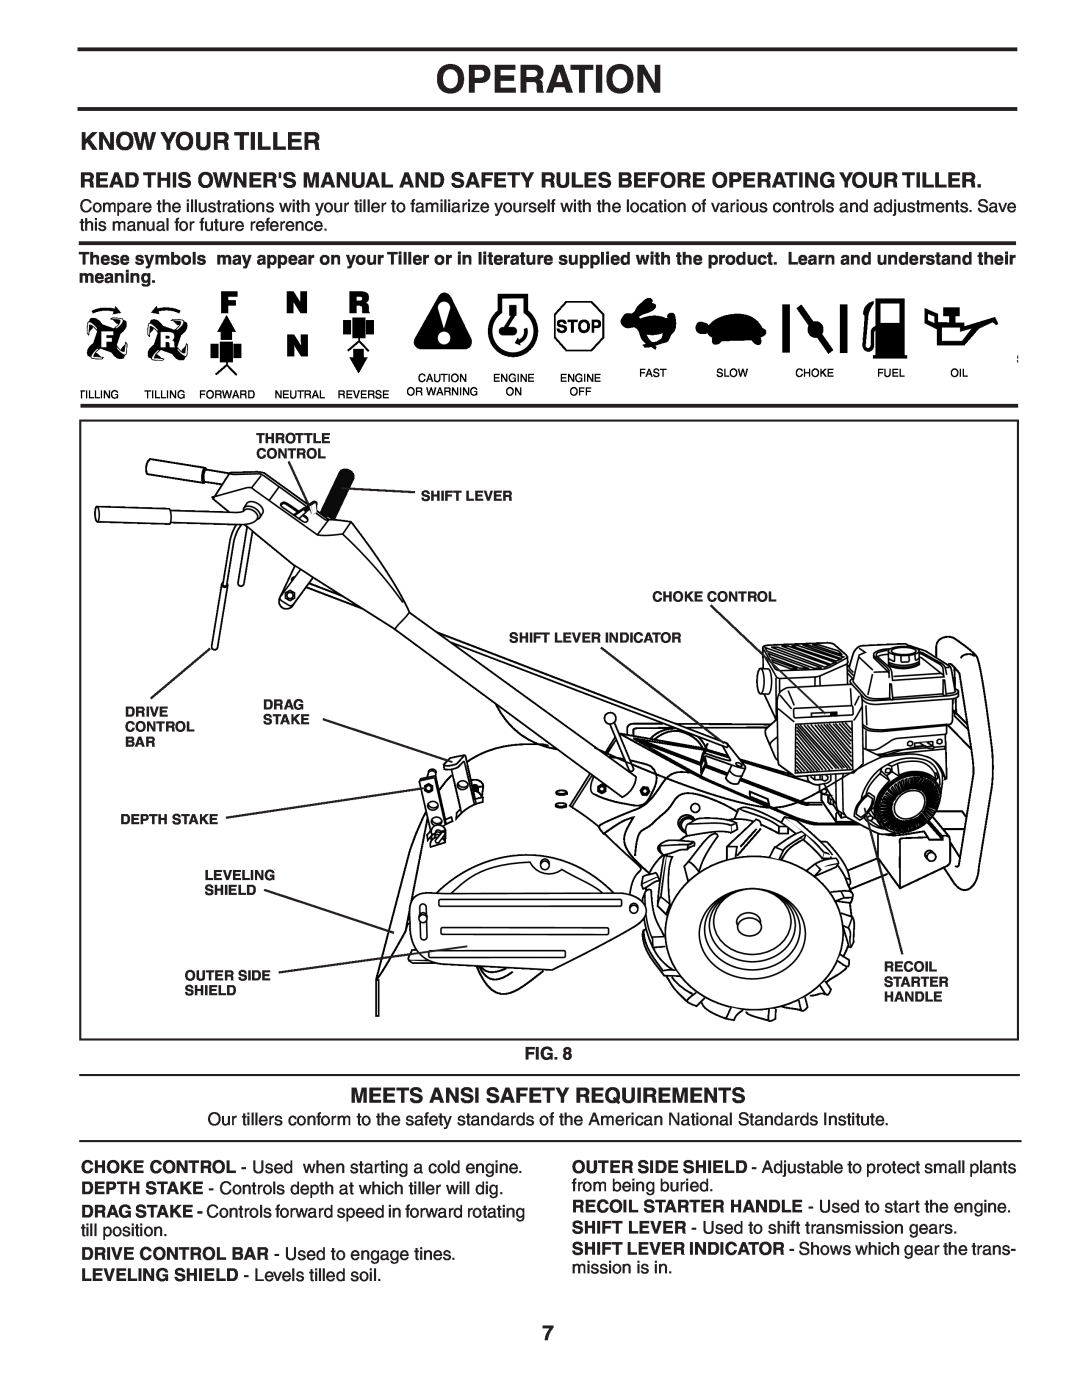 Poulan DRT65 manual Operation, Know Your Tiller, Meets Ansi Safety Requirements 